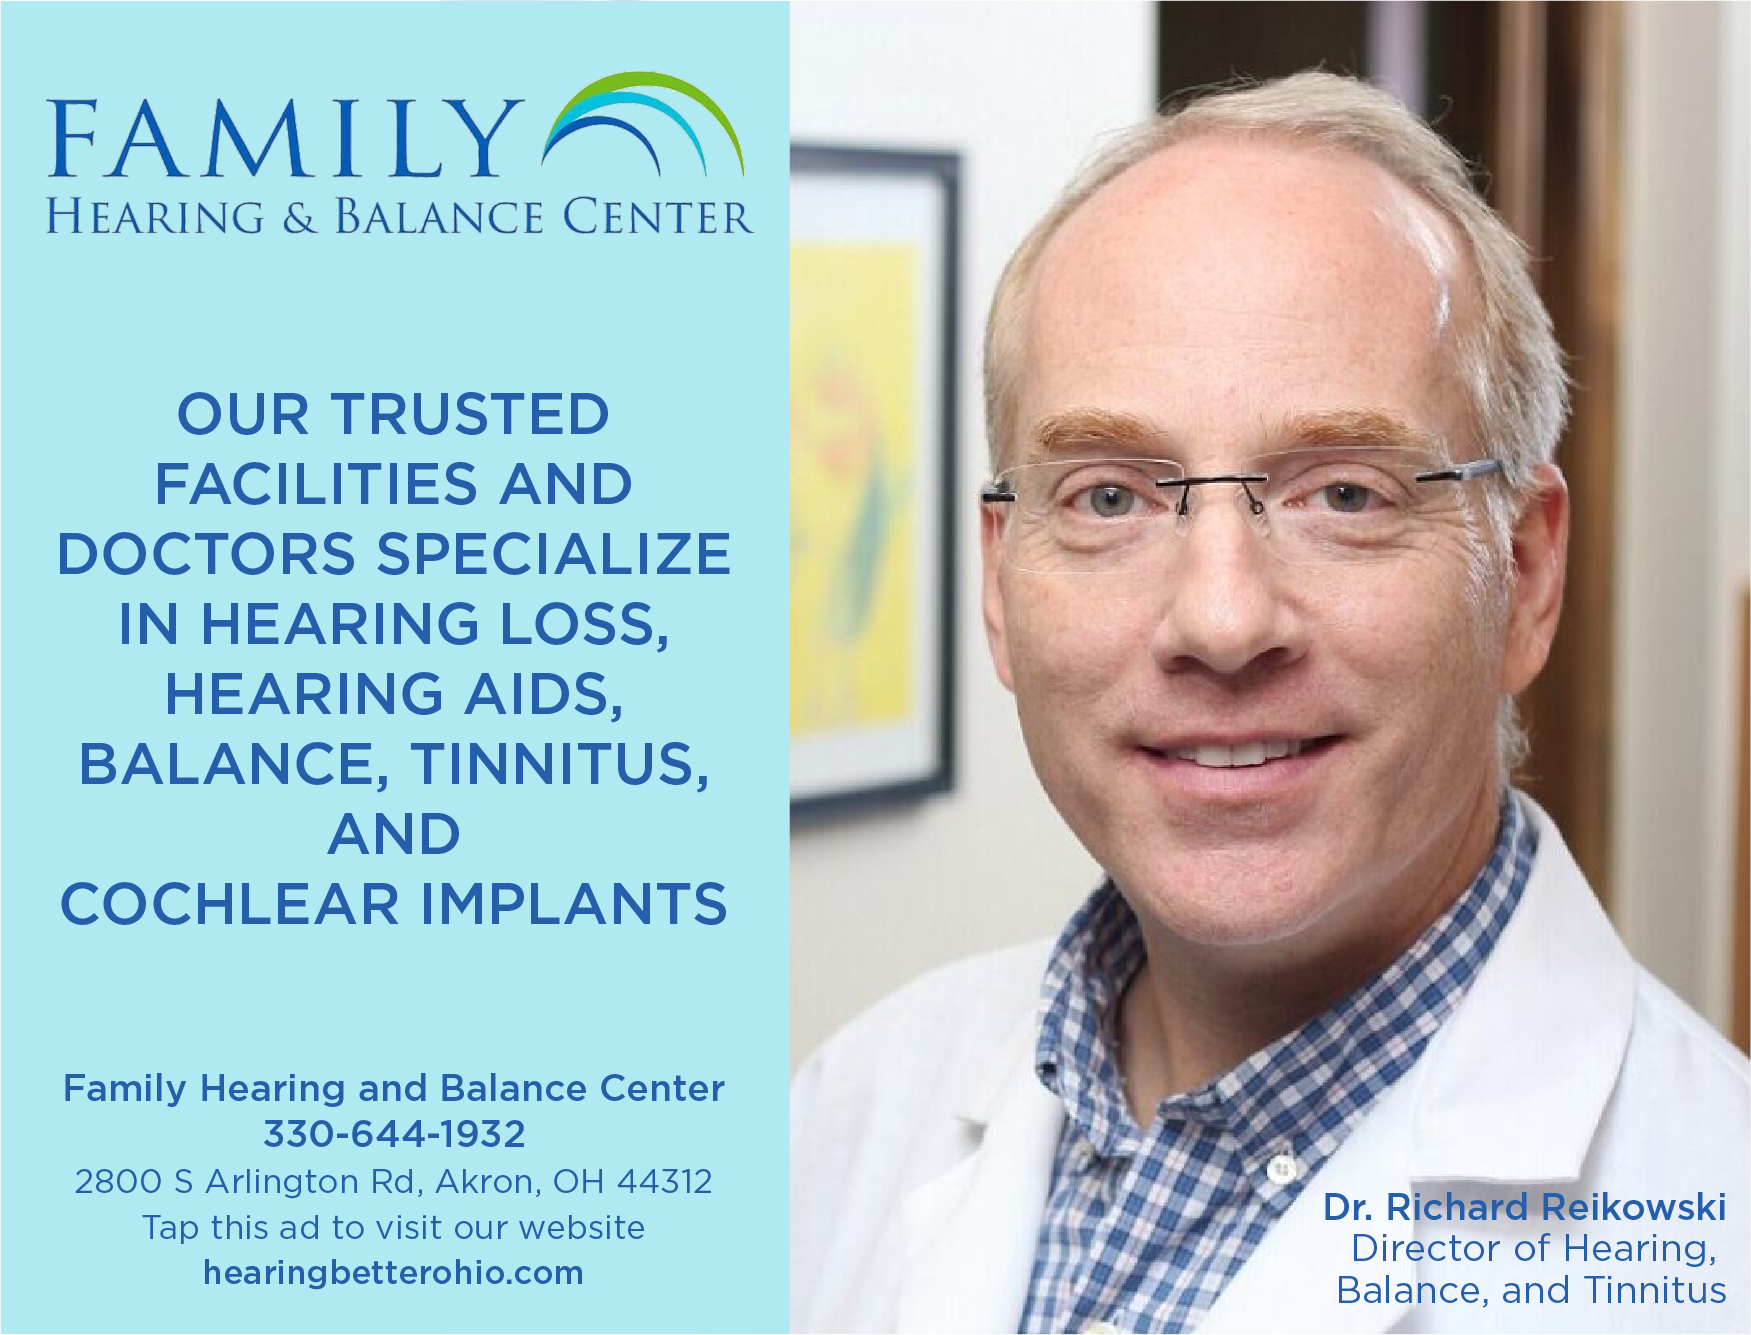 Family Hearing and Balance Center